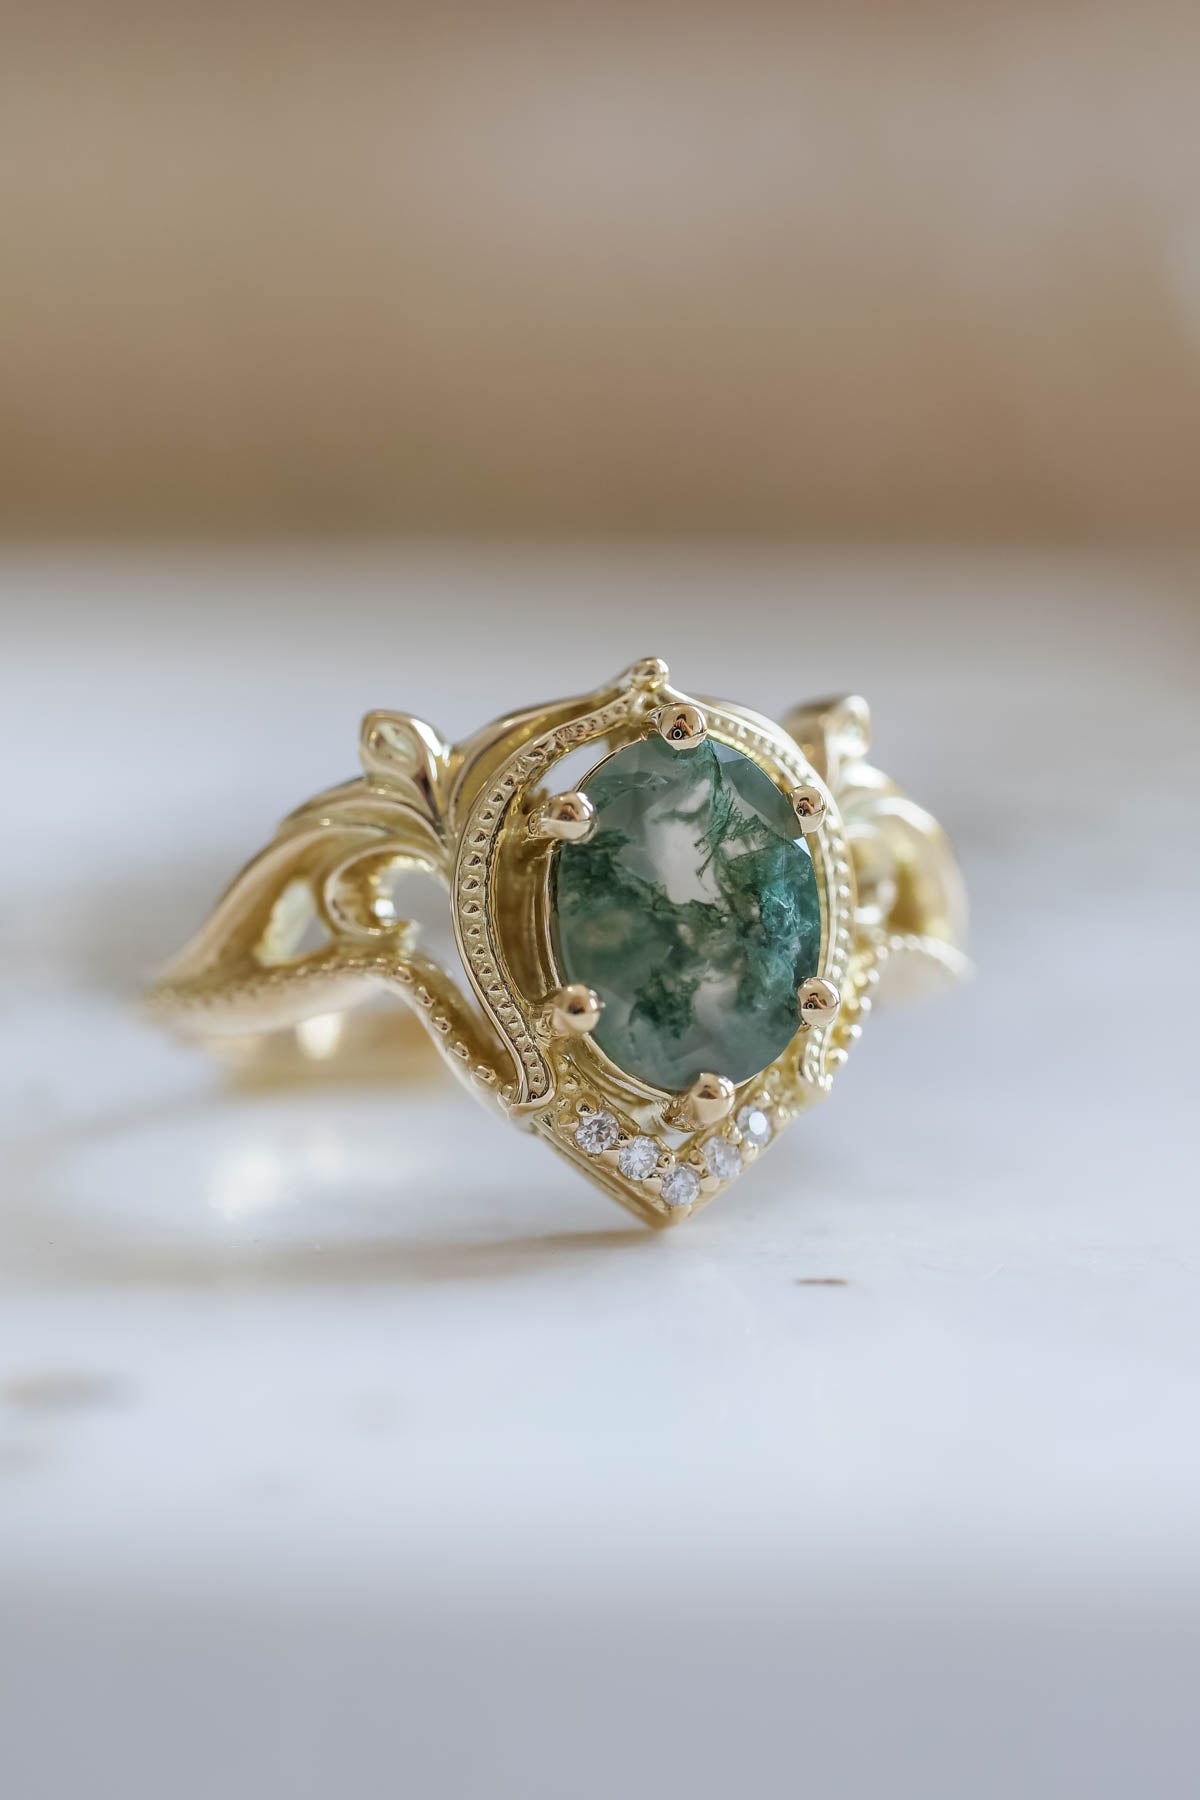 Unique Engagement Rings, Vintage Style Rings, Alternative Wedding Ring